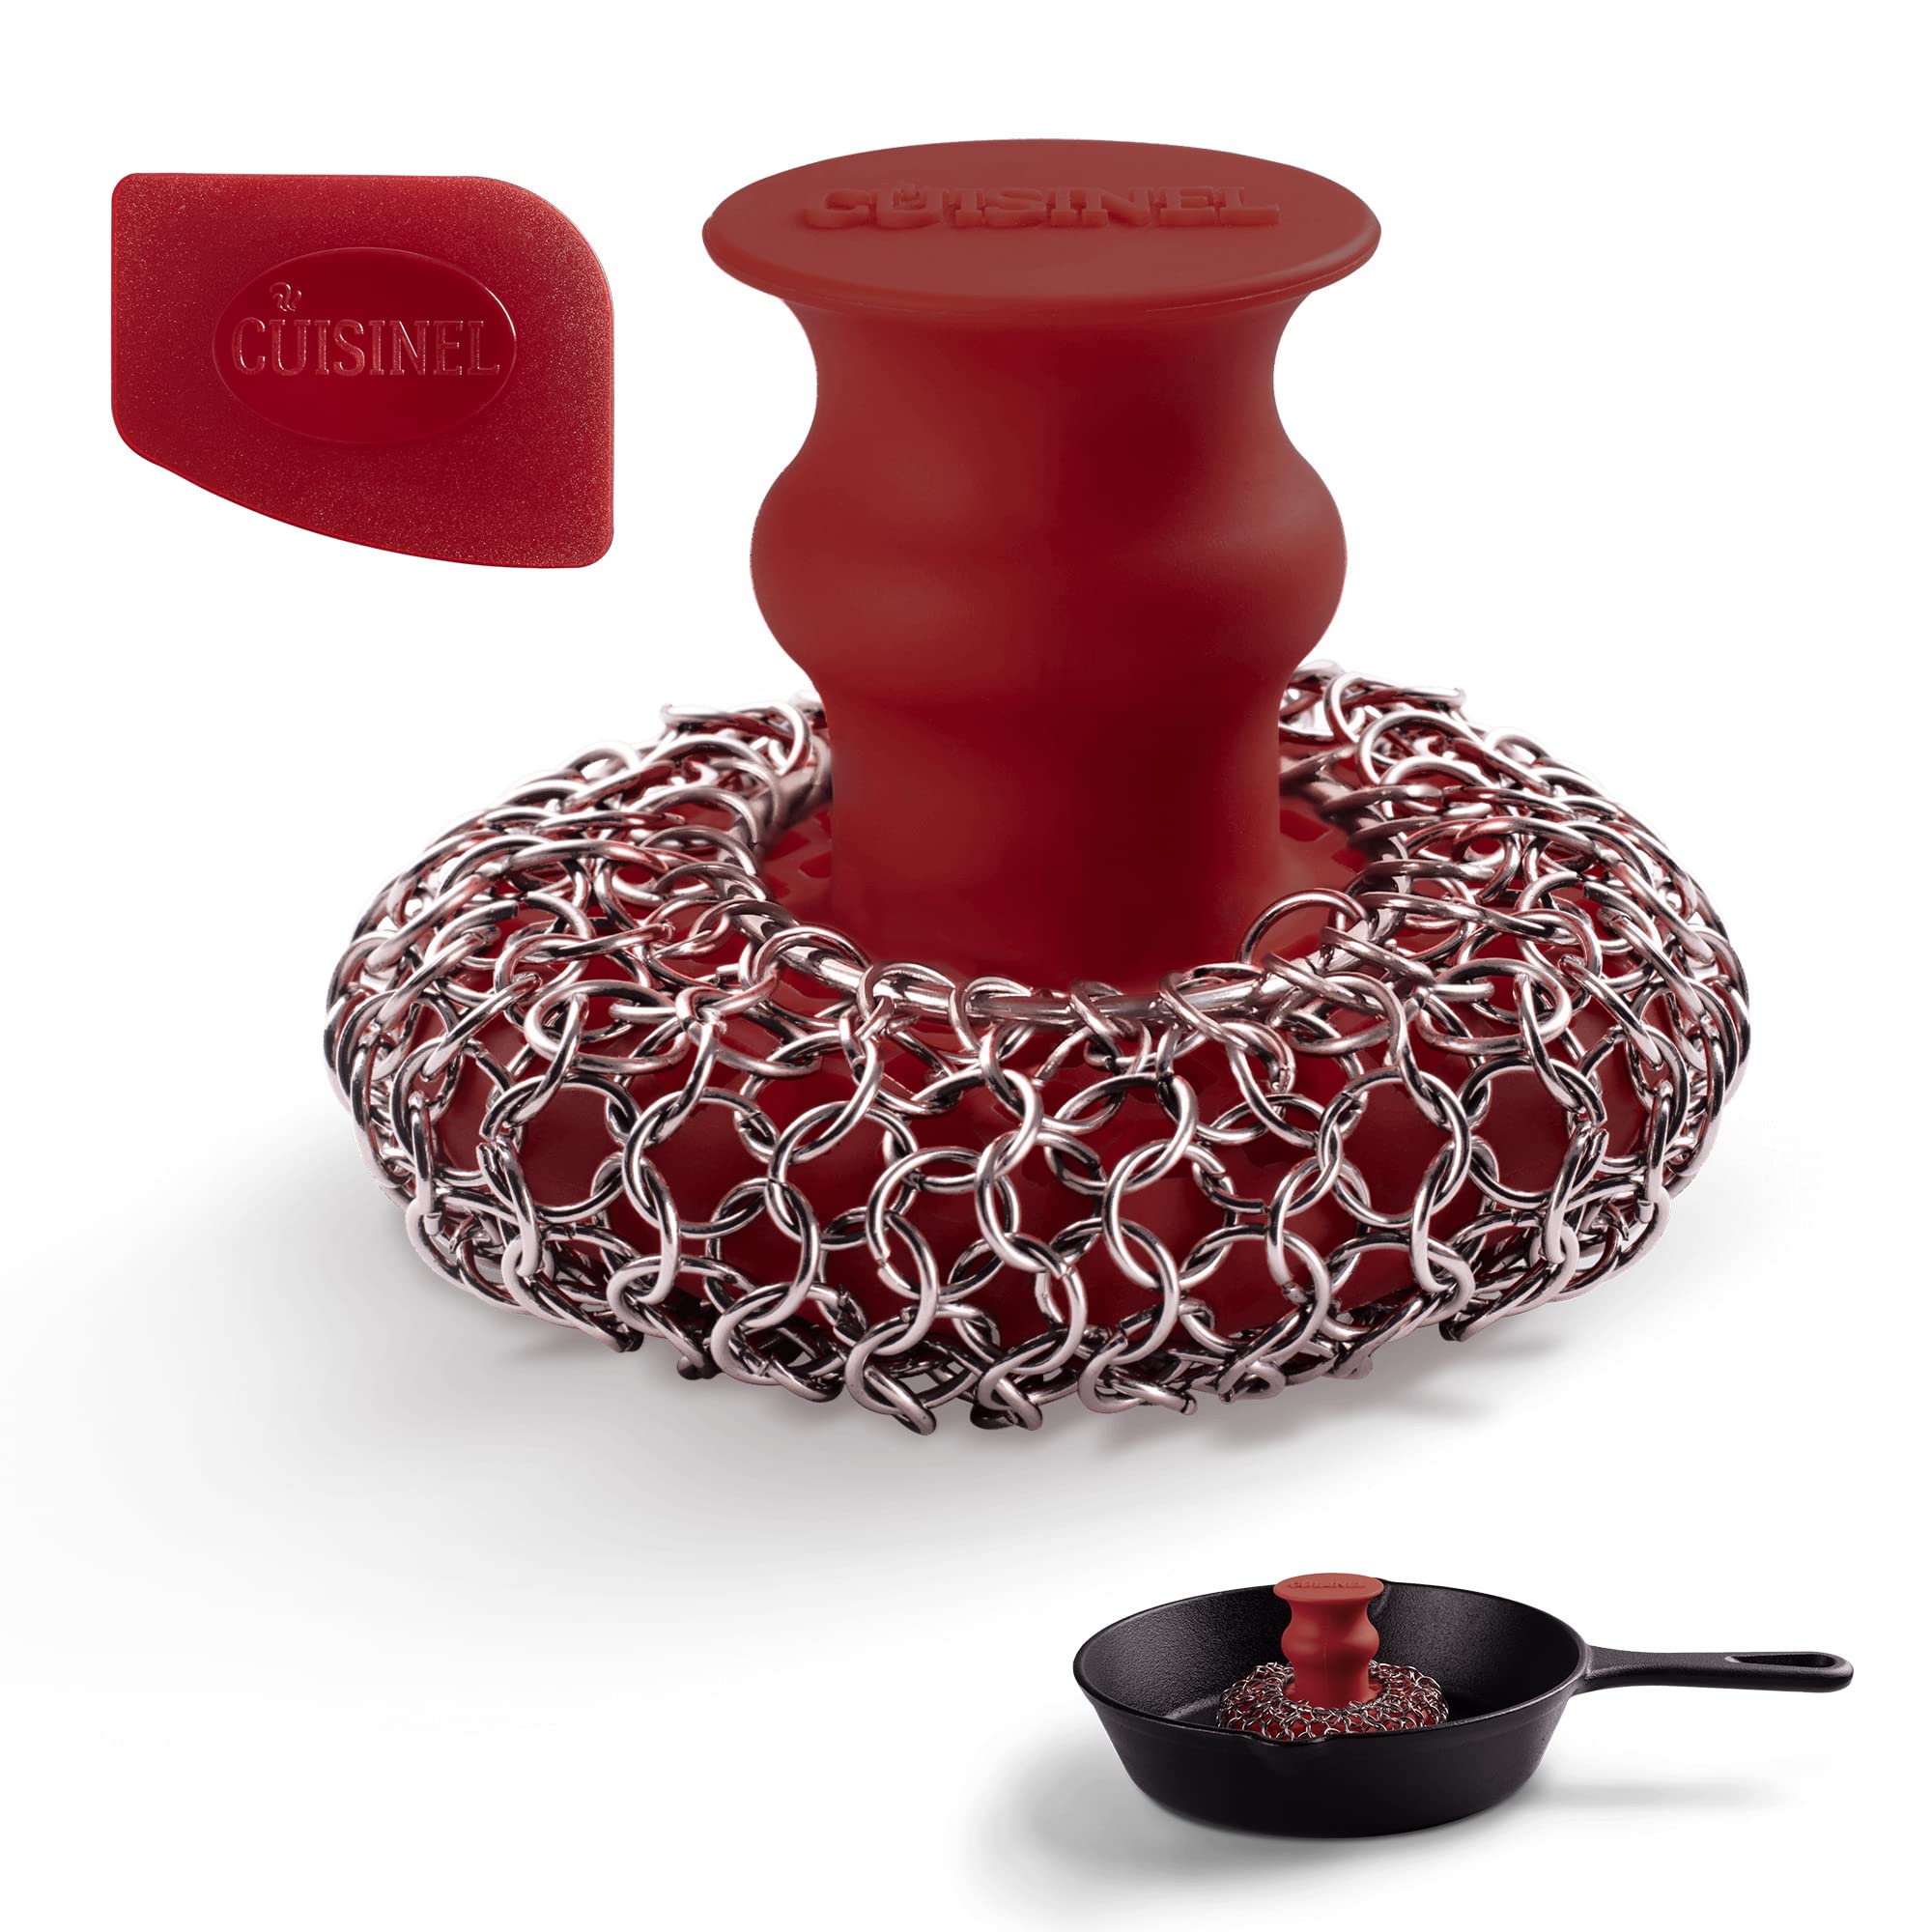 Lodge Chainmail Scrubber Red